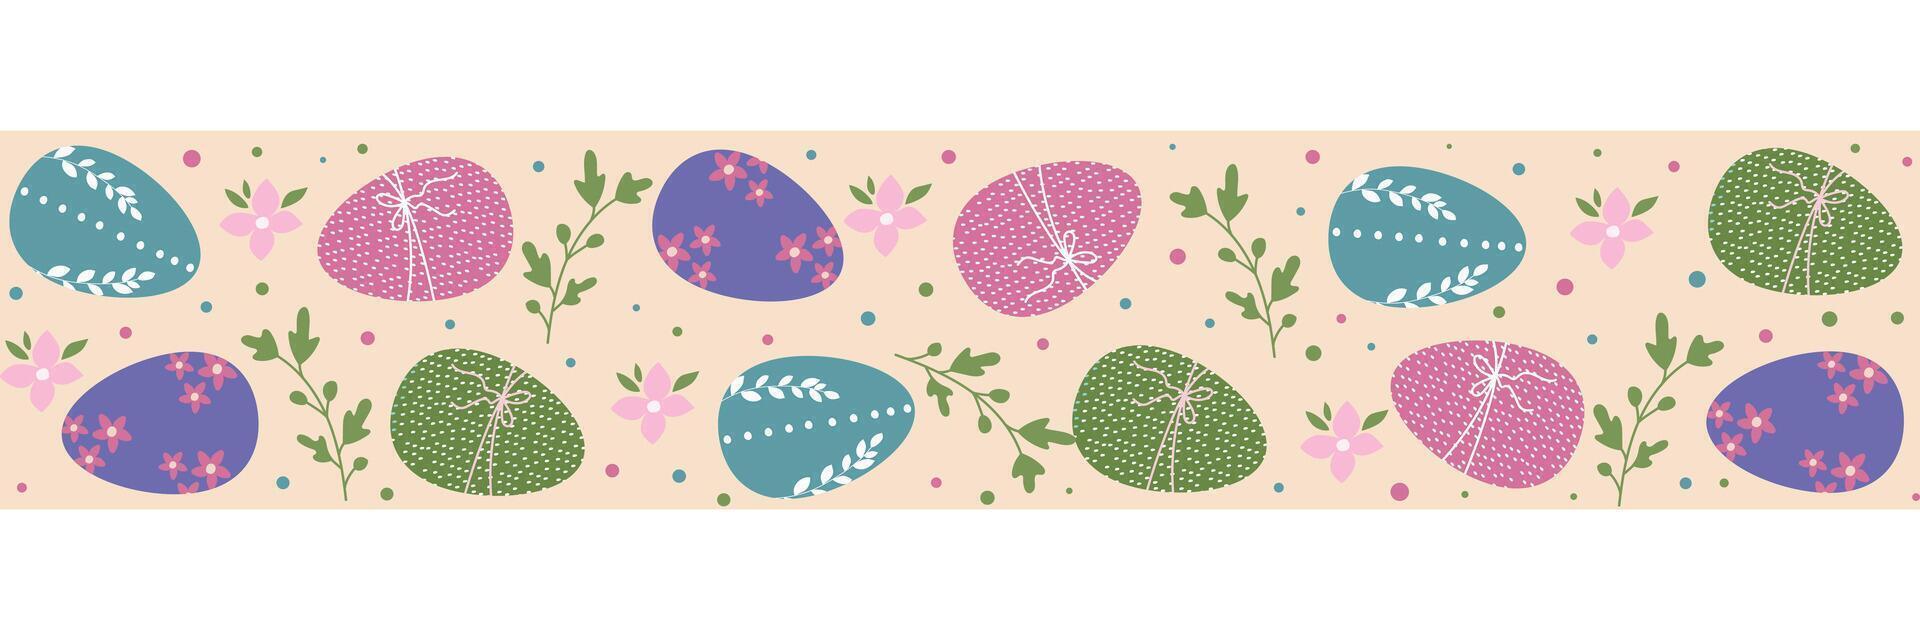 Border with Easter eggs and leaves. Easter pattern. vector